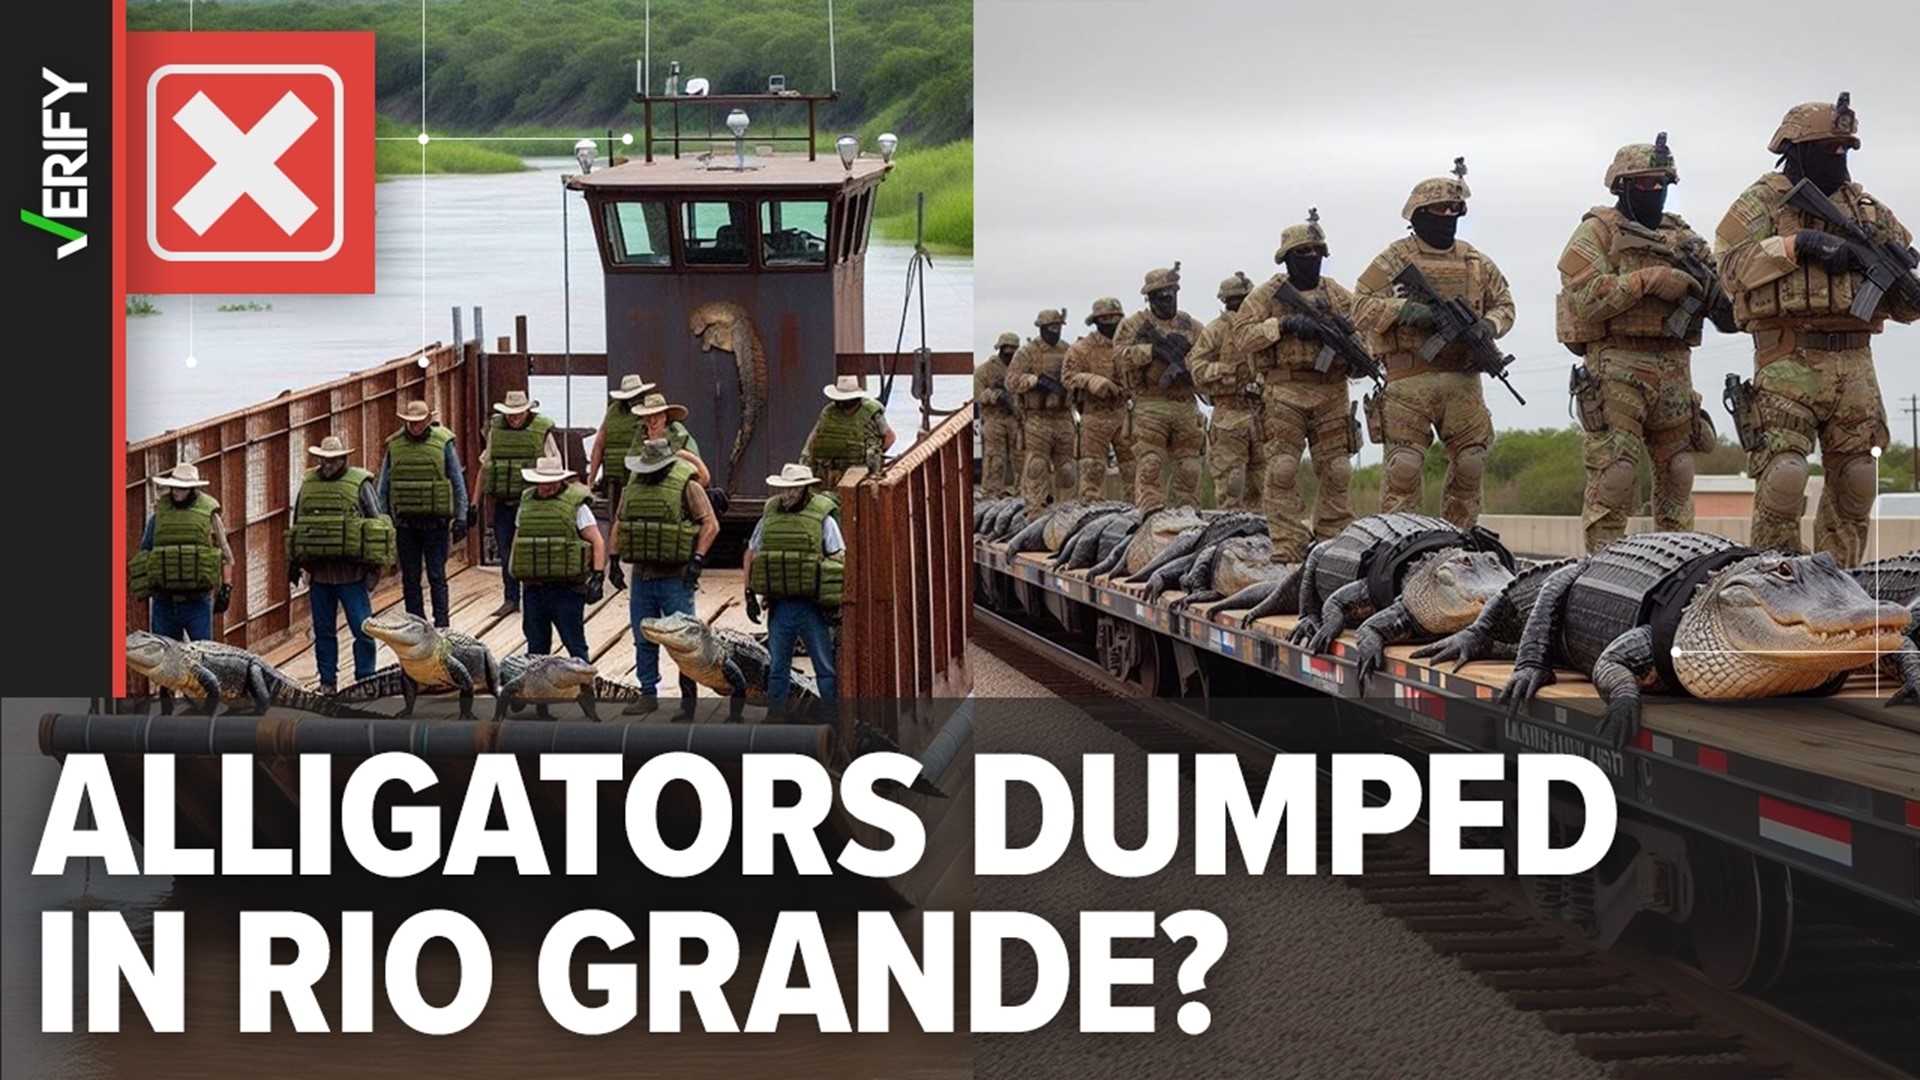 A pair of images shared on TikTok in late February claim to show members of U.S. Border Patrol putting alligators into the Rio Grande as a way to deter migrants.